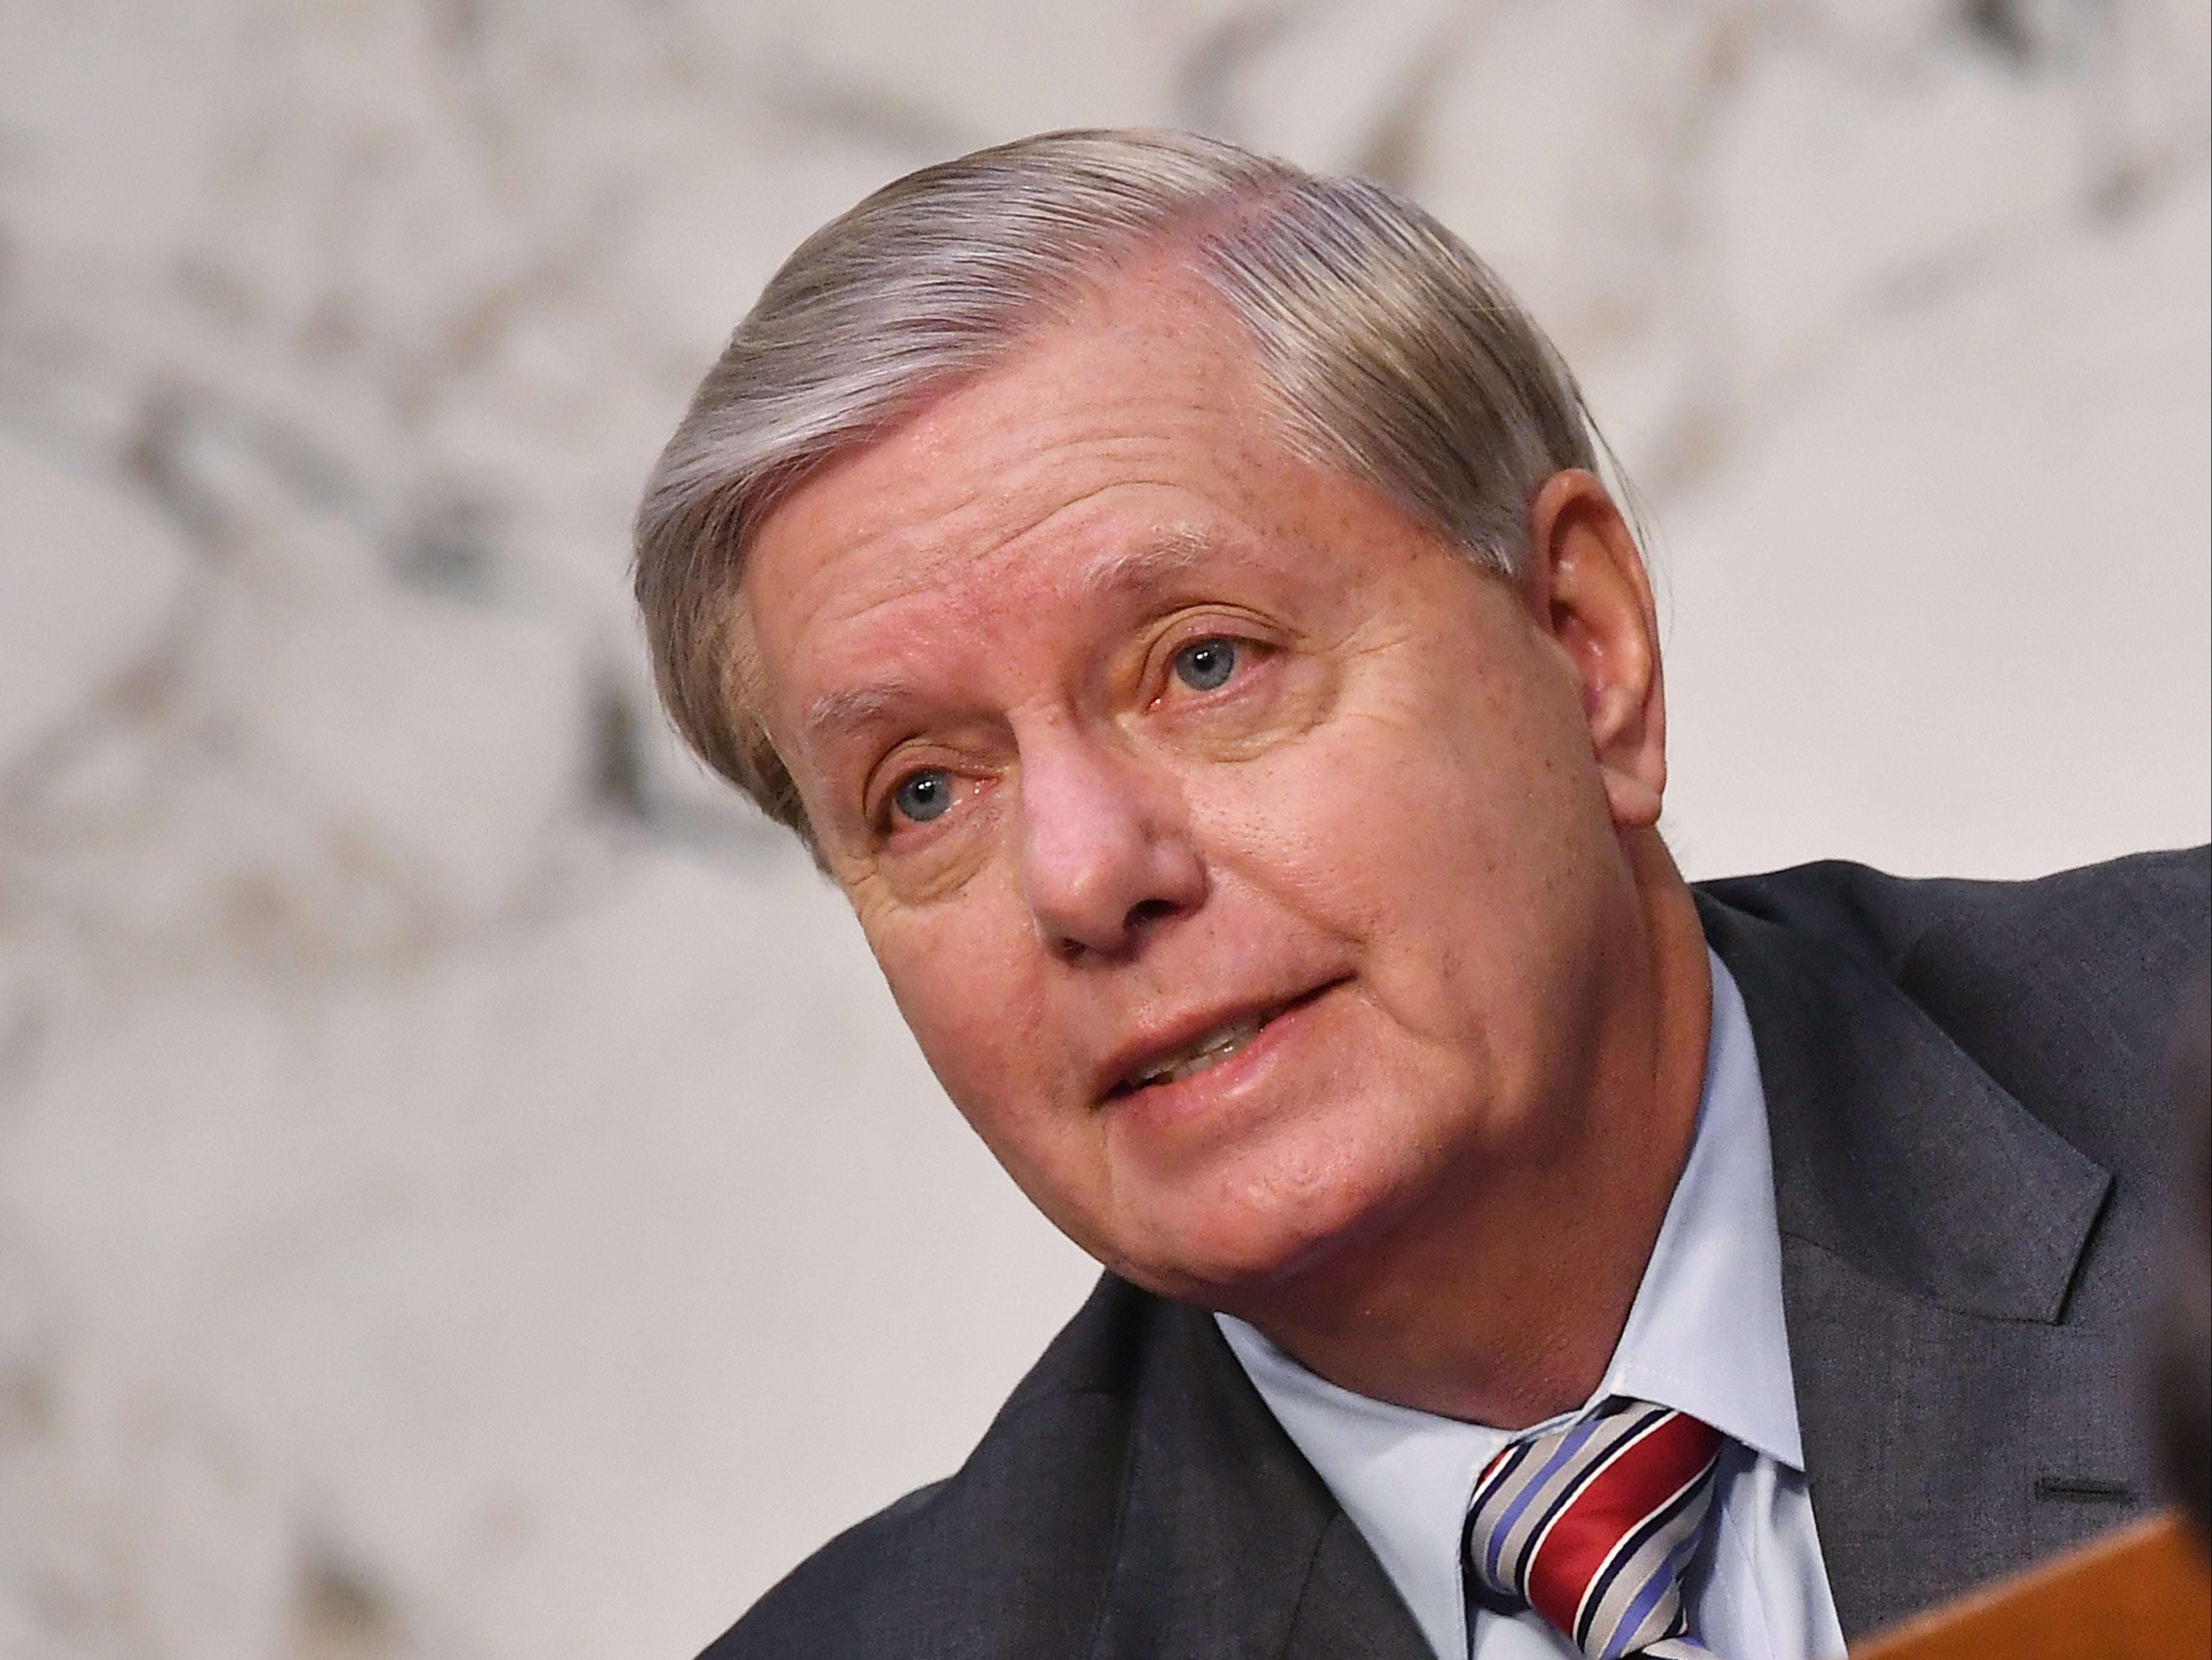 image for Lindsey Graham says women ‘have a place in America’ and ‘can go anywhere’ if they are against abortion